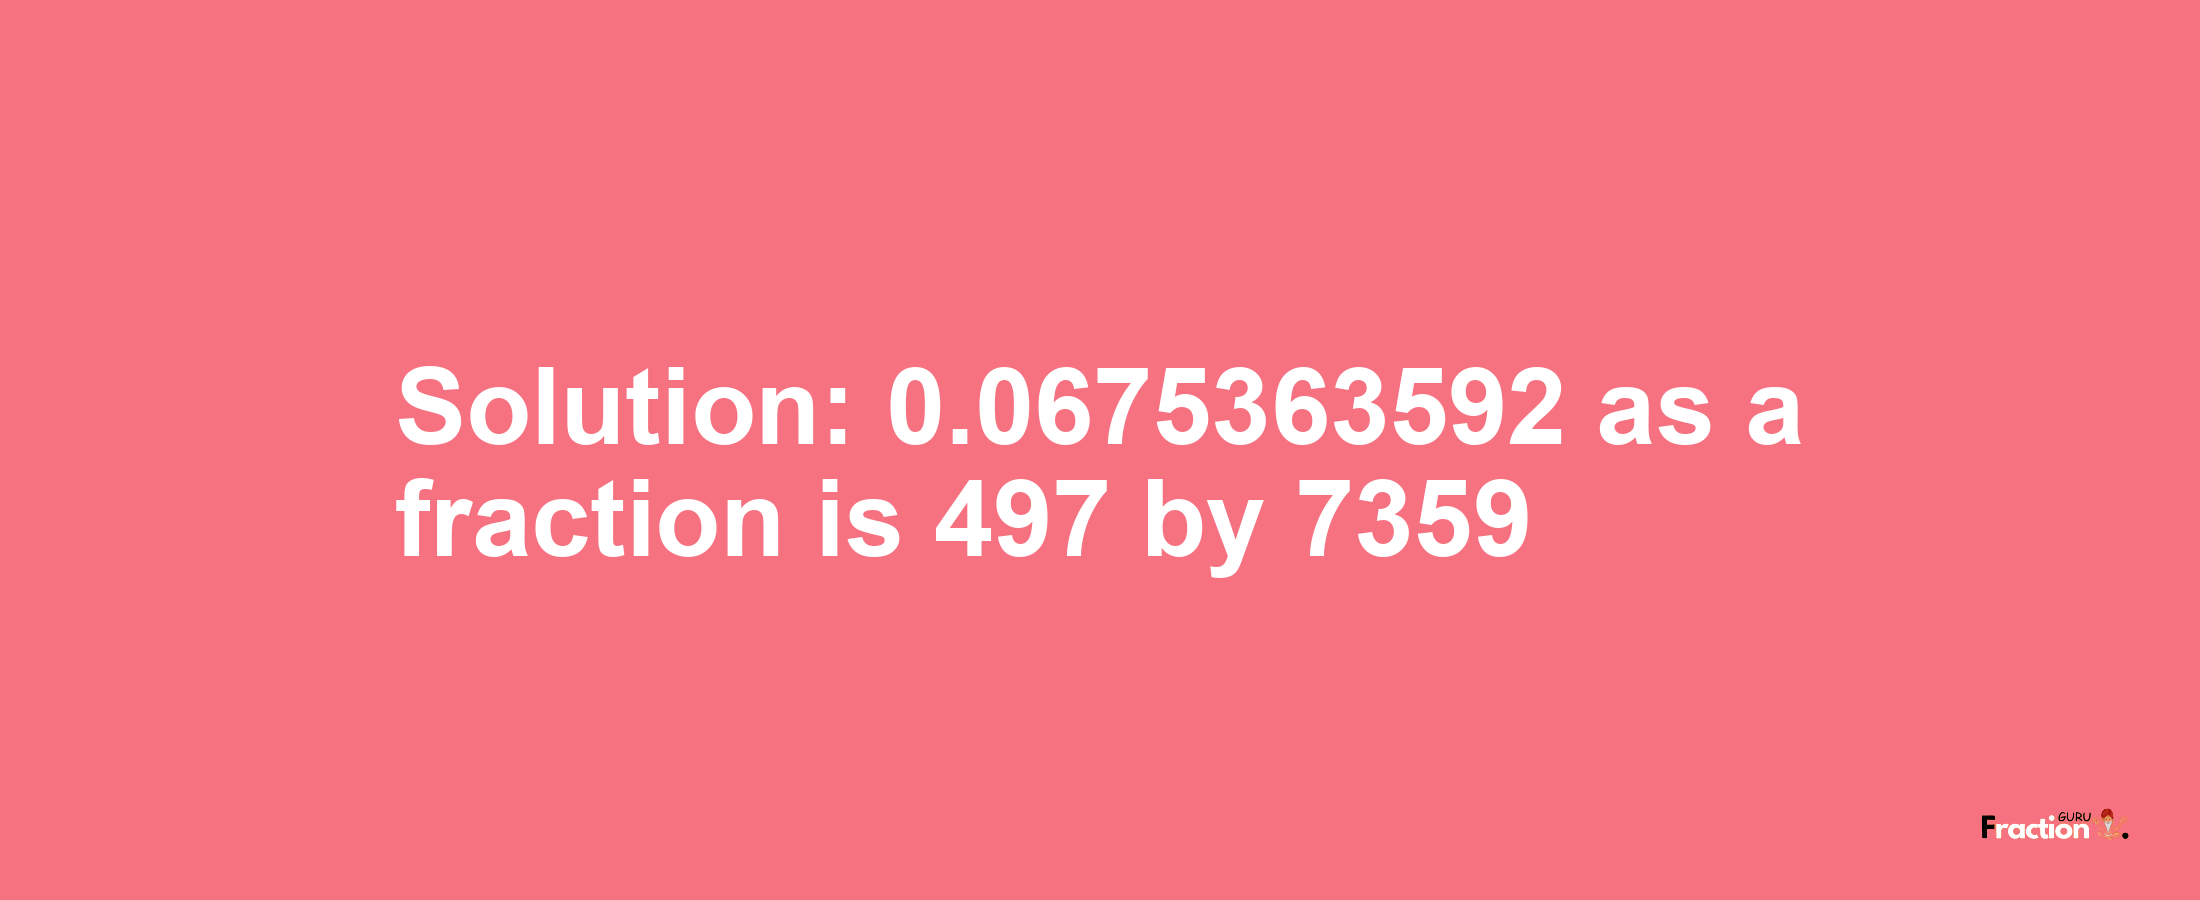 Solution:0.0675363592 as a fraction is 497/7359